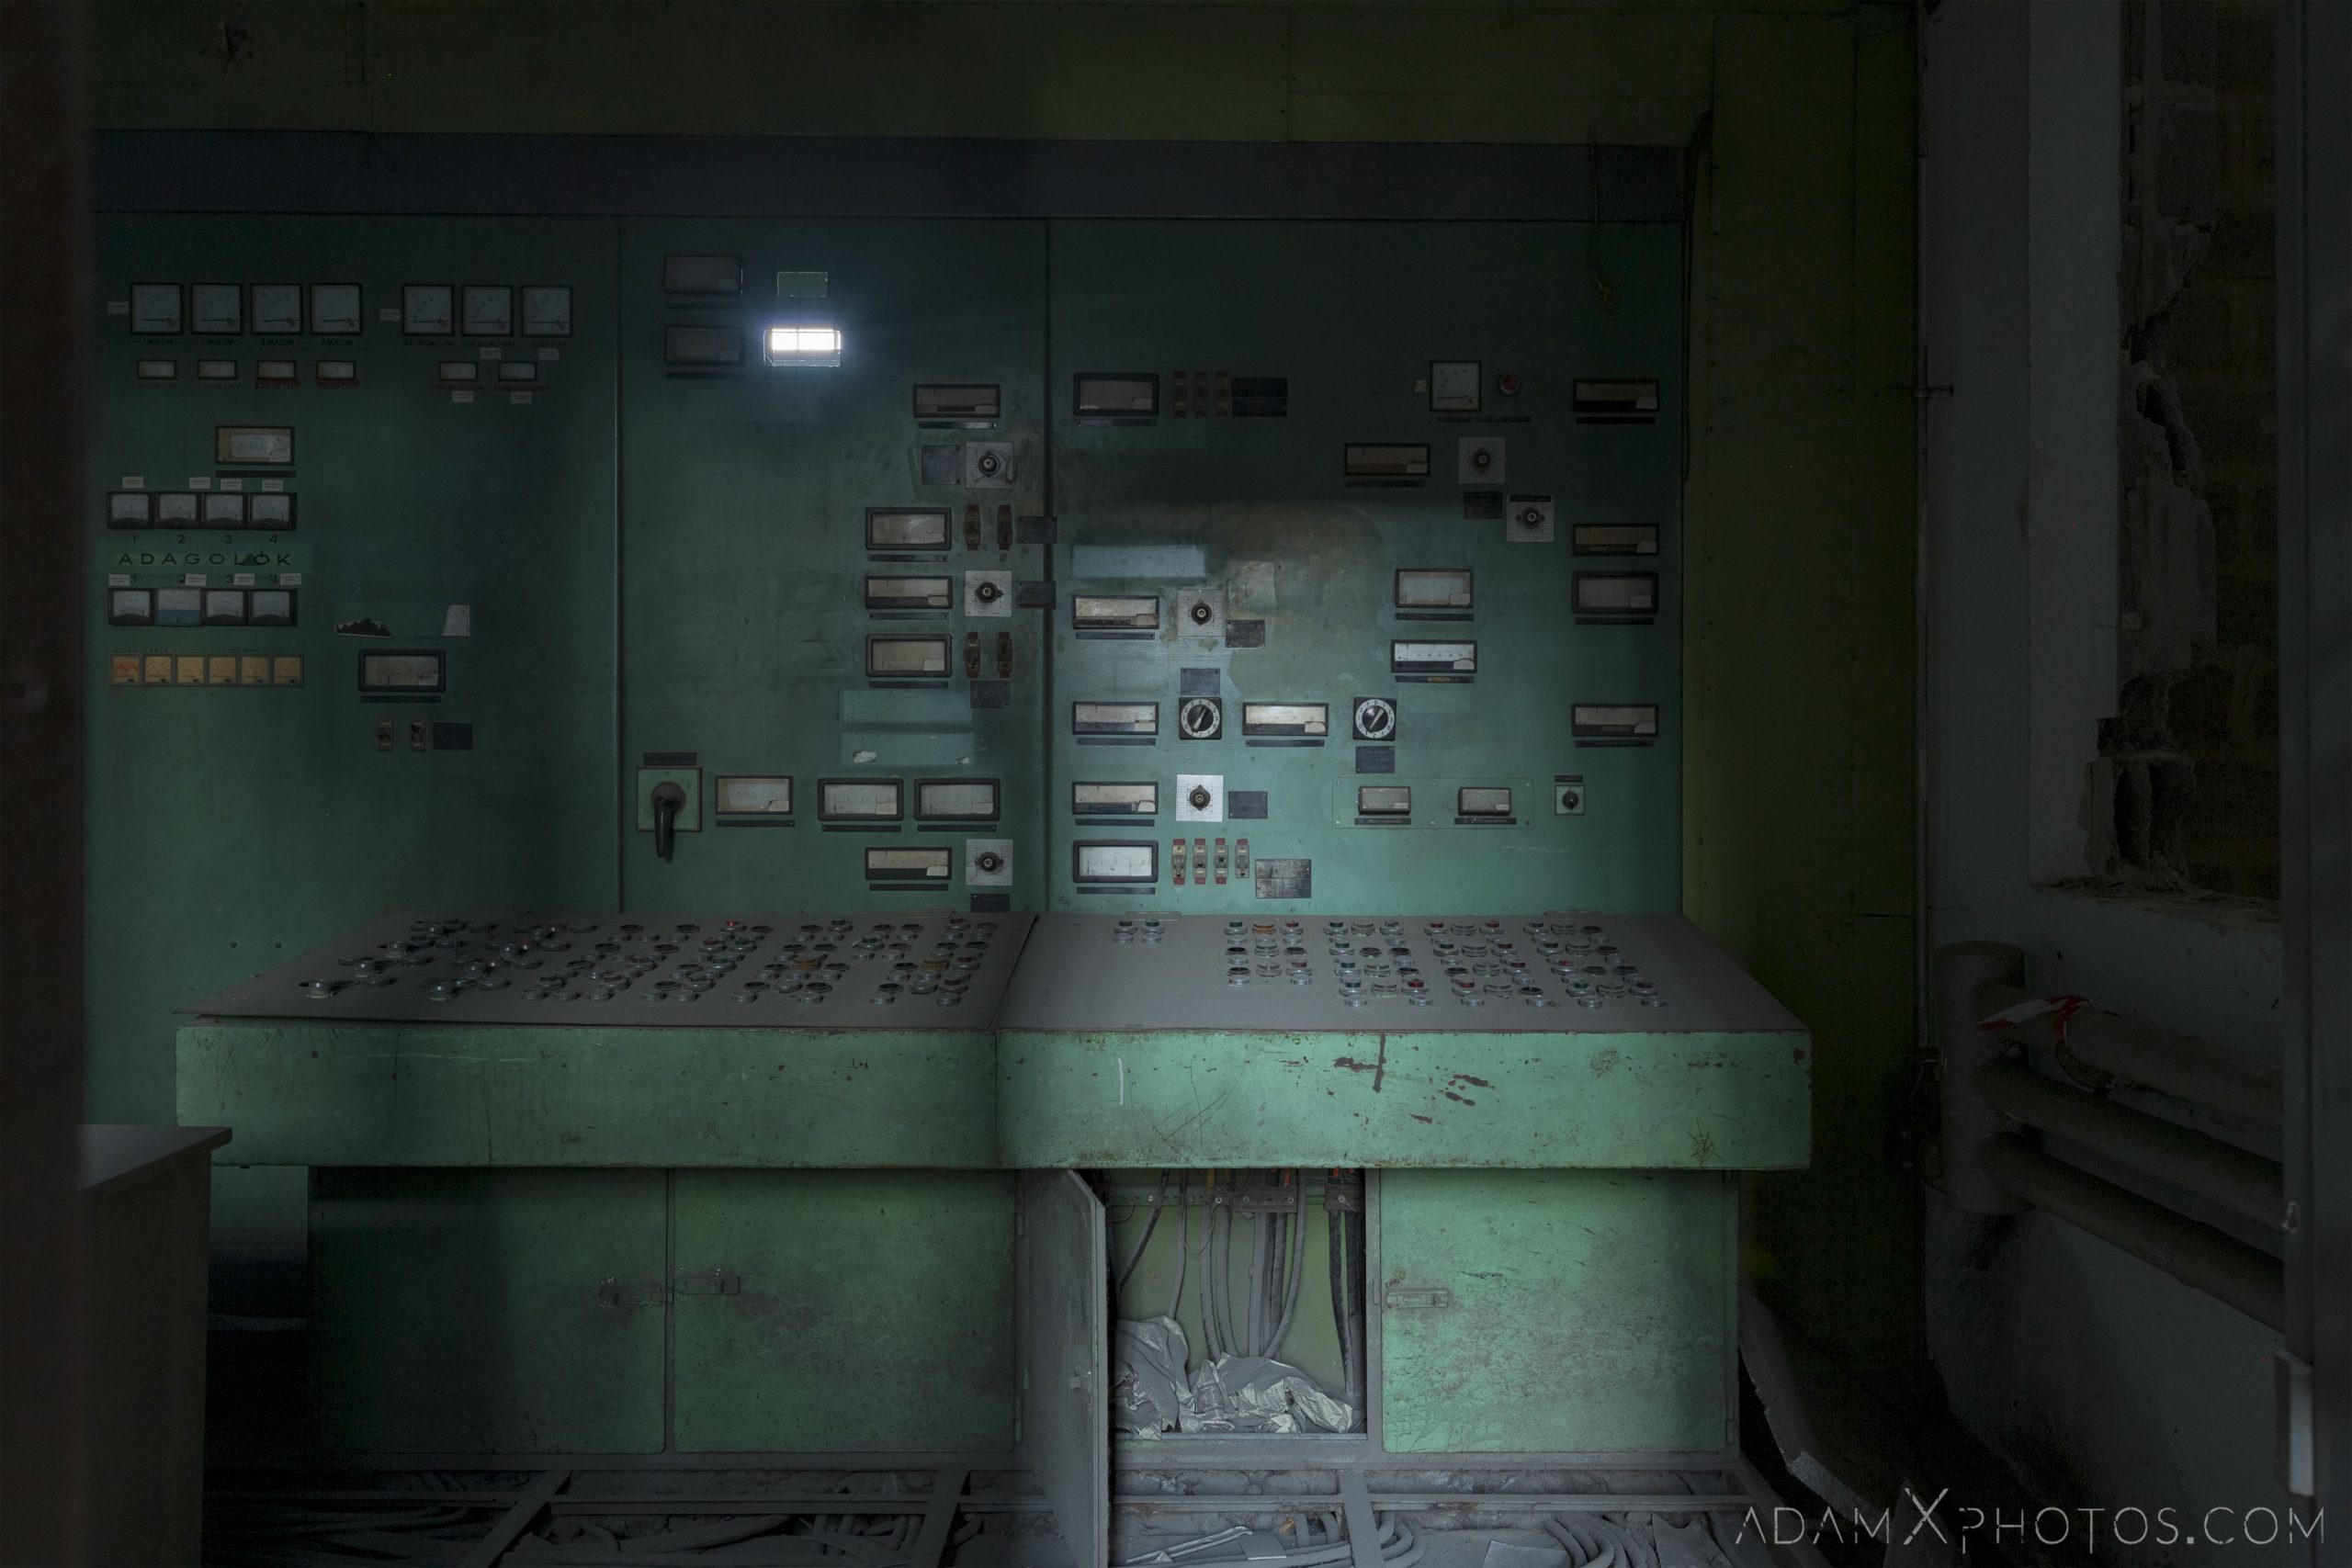 Green control panels industry industrial rusty rusting Bladerunner Blade Runner 2049 Powerplant Inota Shephard's Power Plant Hungary Adam X Urbex Urban Exploration Access 2018 Abandoned decay ruins lost forgotten derelict location creepy haunting eerie security